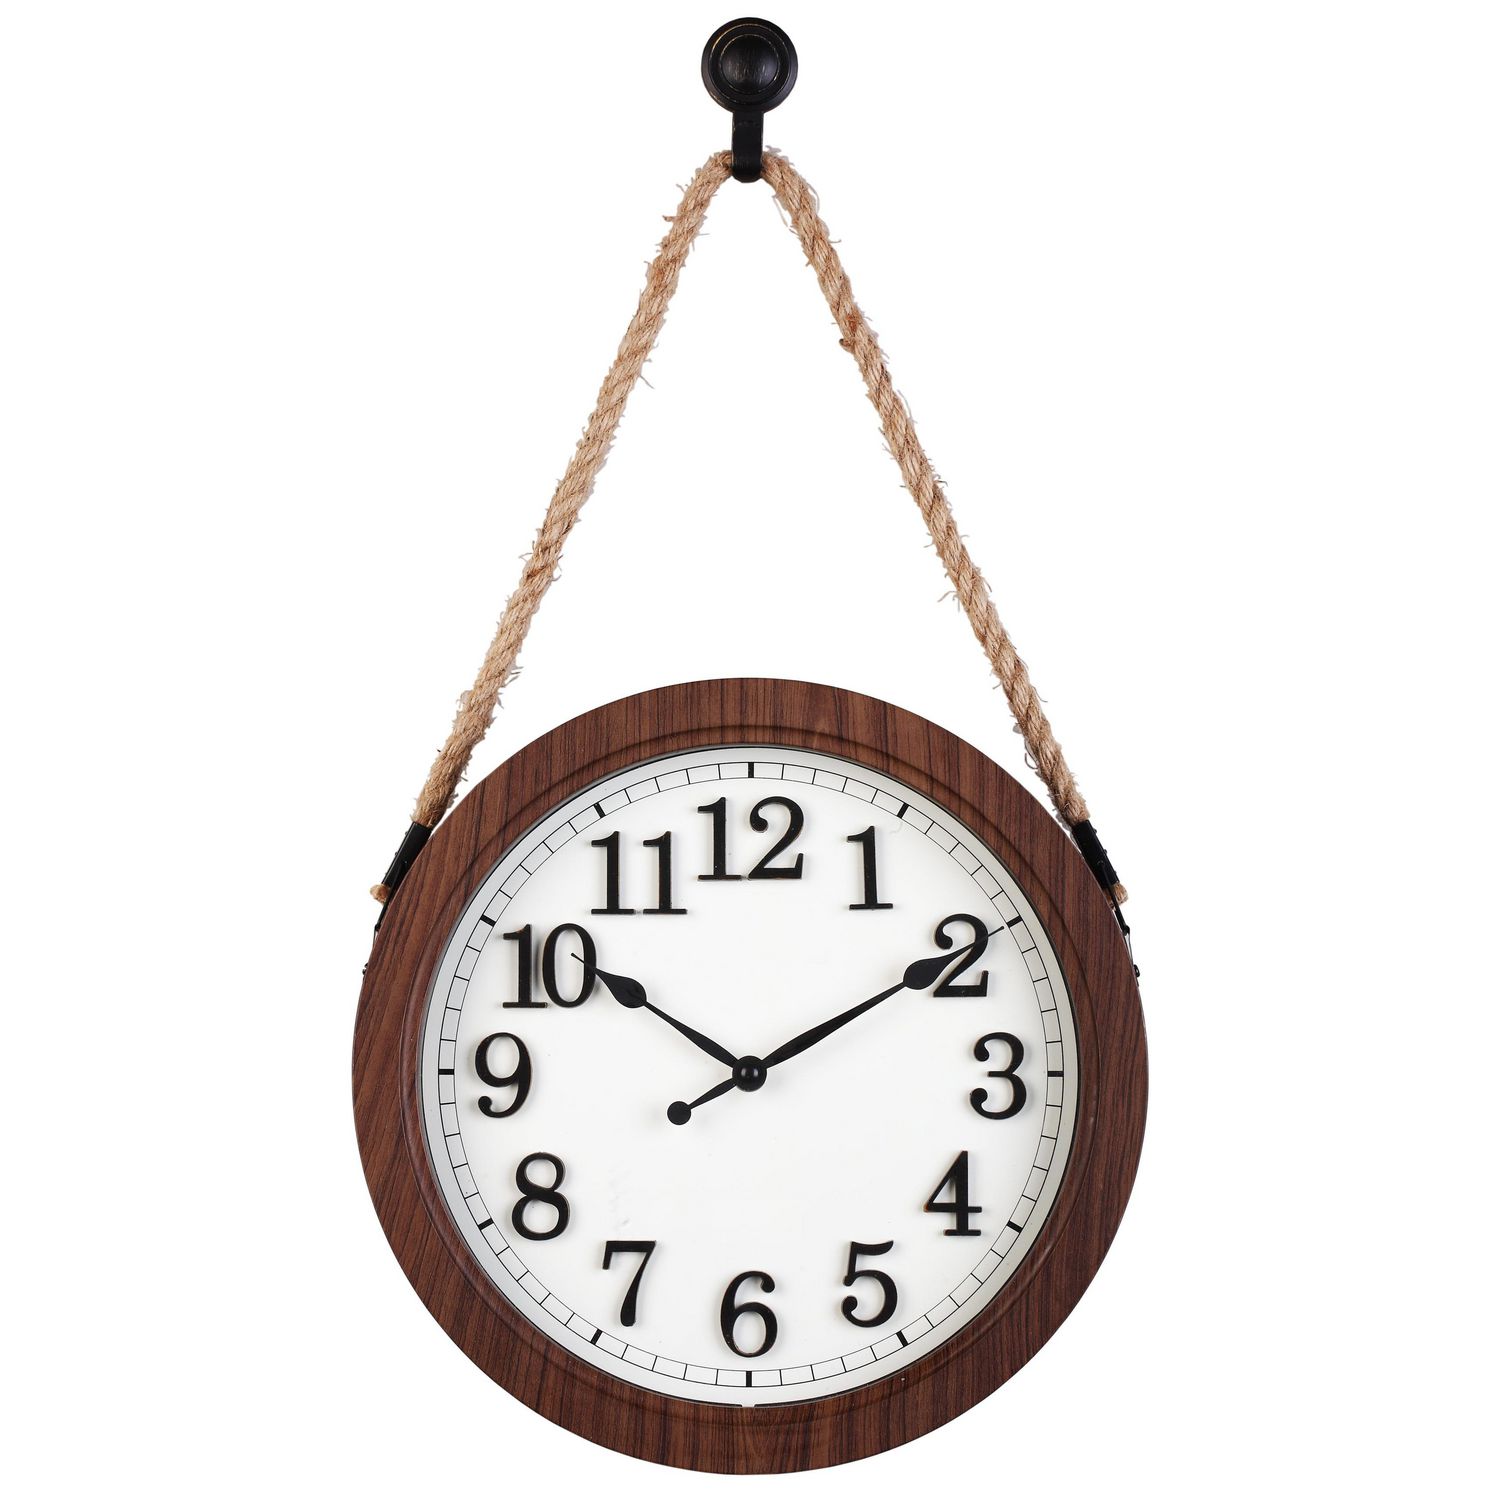 Hometrends Nautical Wall Clock With Hook Canada - Nautical Wall Clock Canada